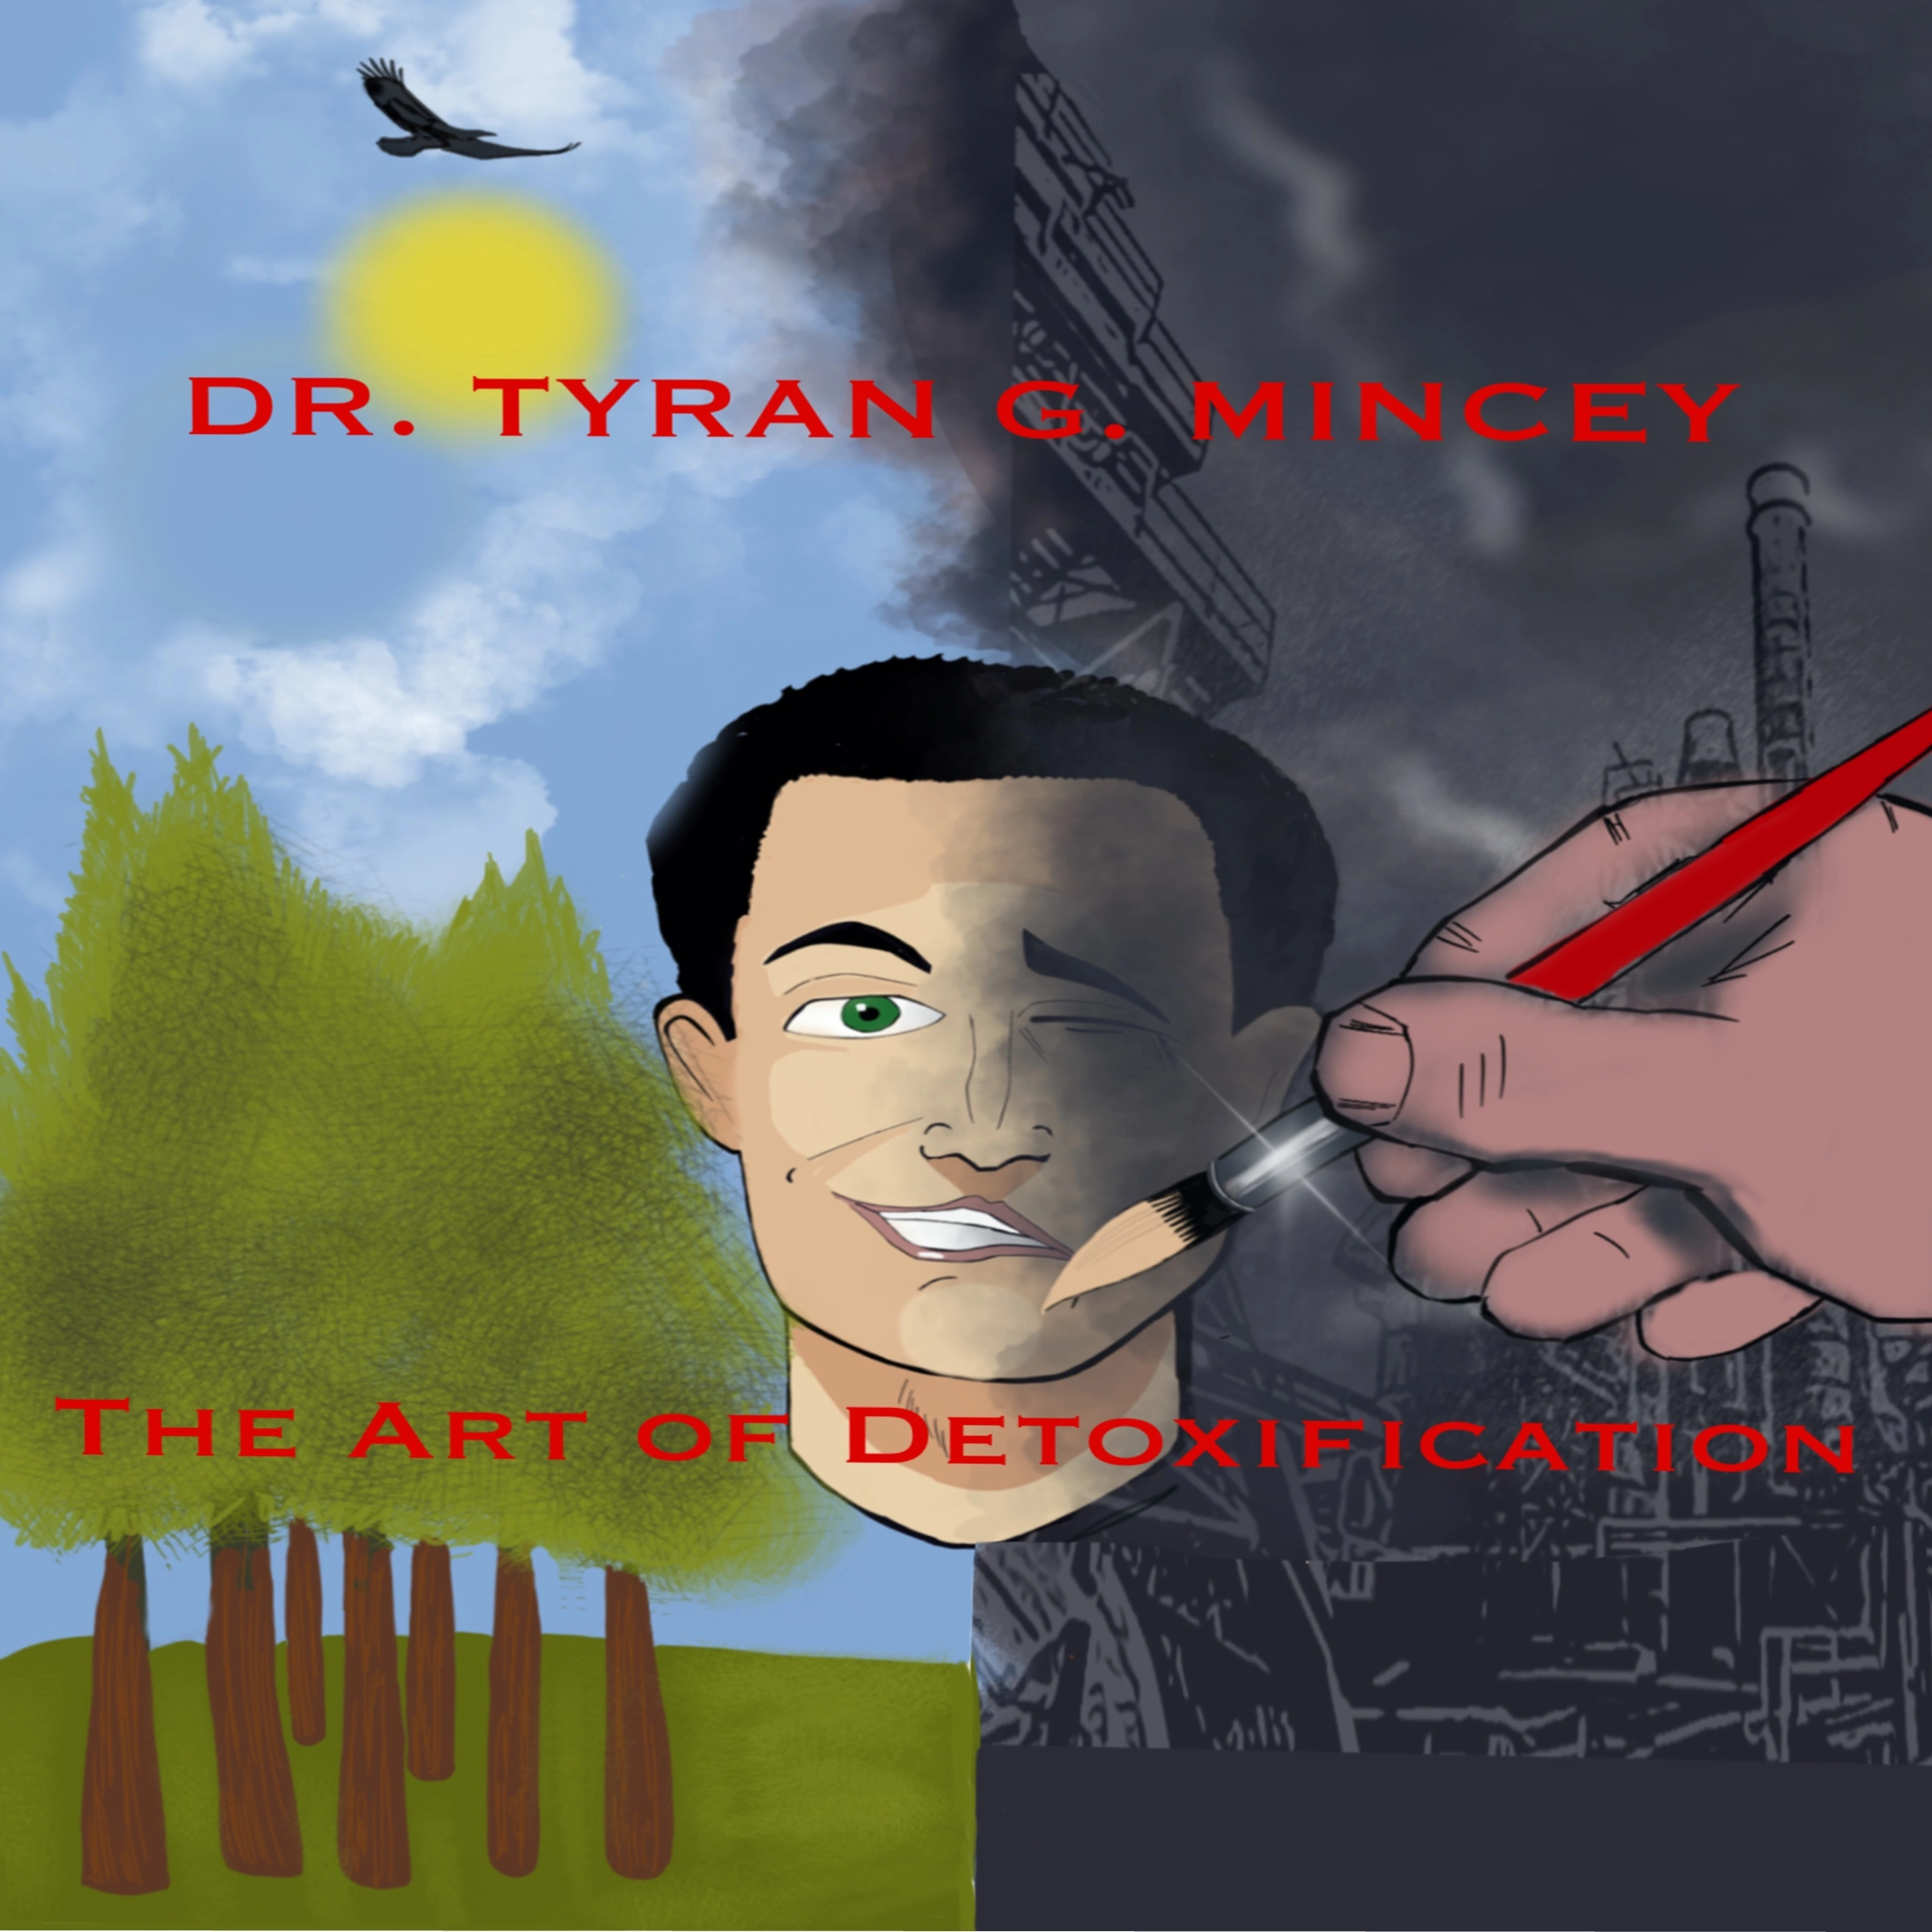 THE ART OF DETOXIFICATION. AN INTRODUCTION TO MAINTAINING HEALTH IN A TOXIC ENVIRONMENT Audiobook by Dr Tyran Mincey